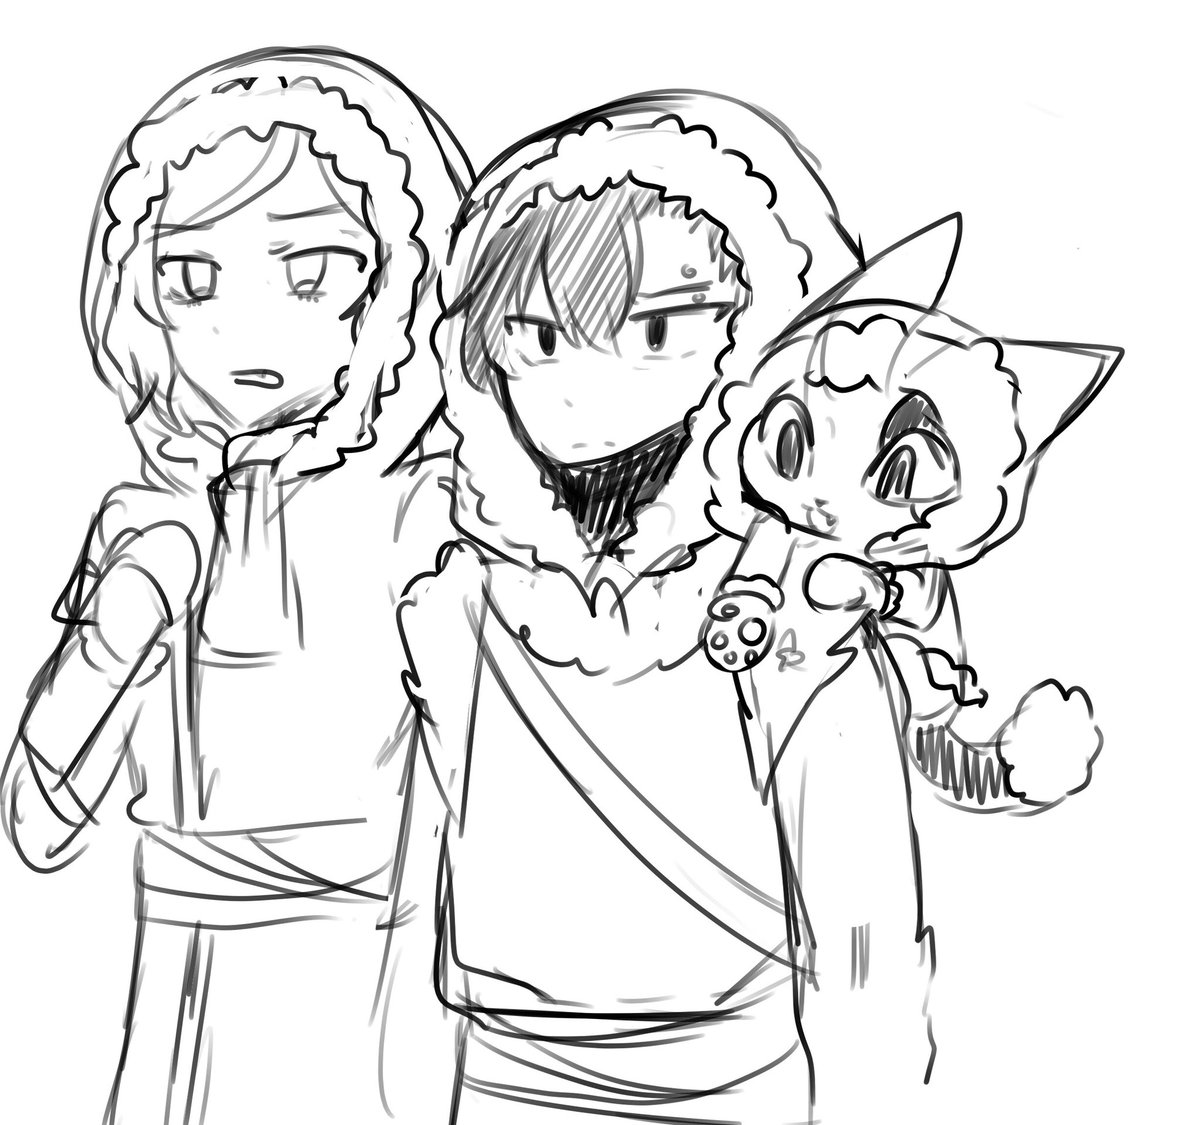 Snow outfits. Will be playing around with wintery explorer outfits 